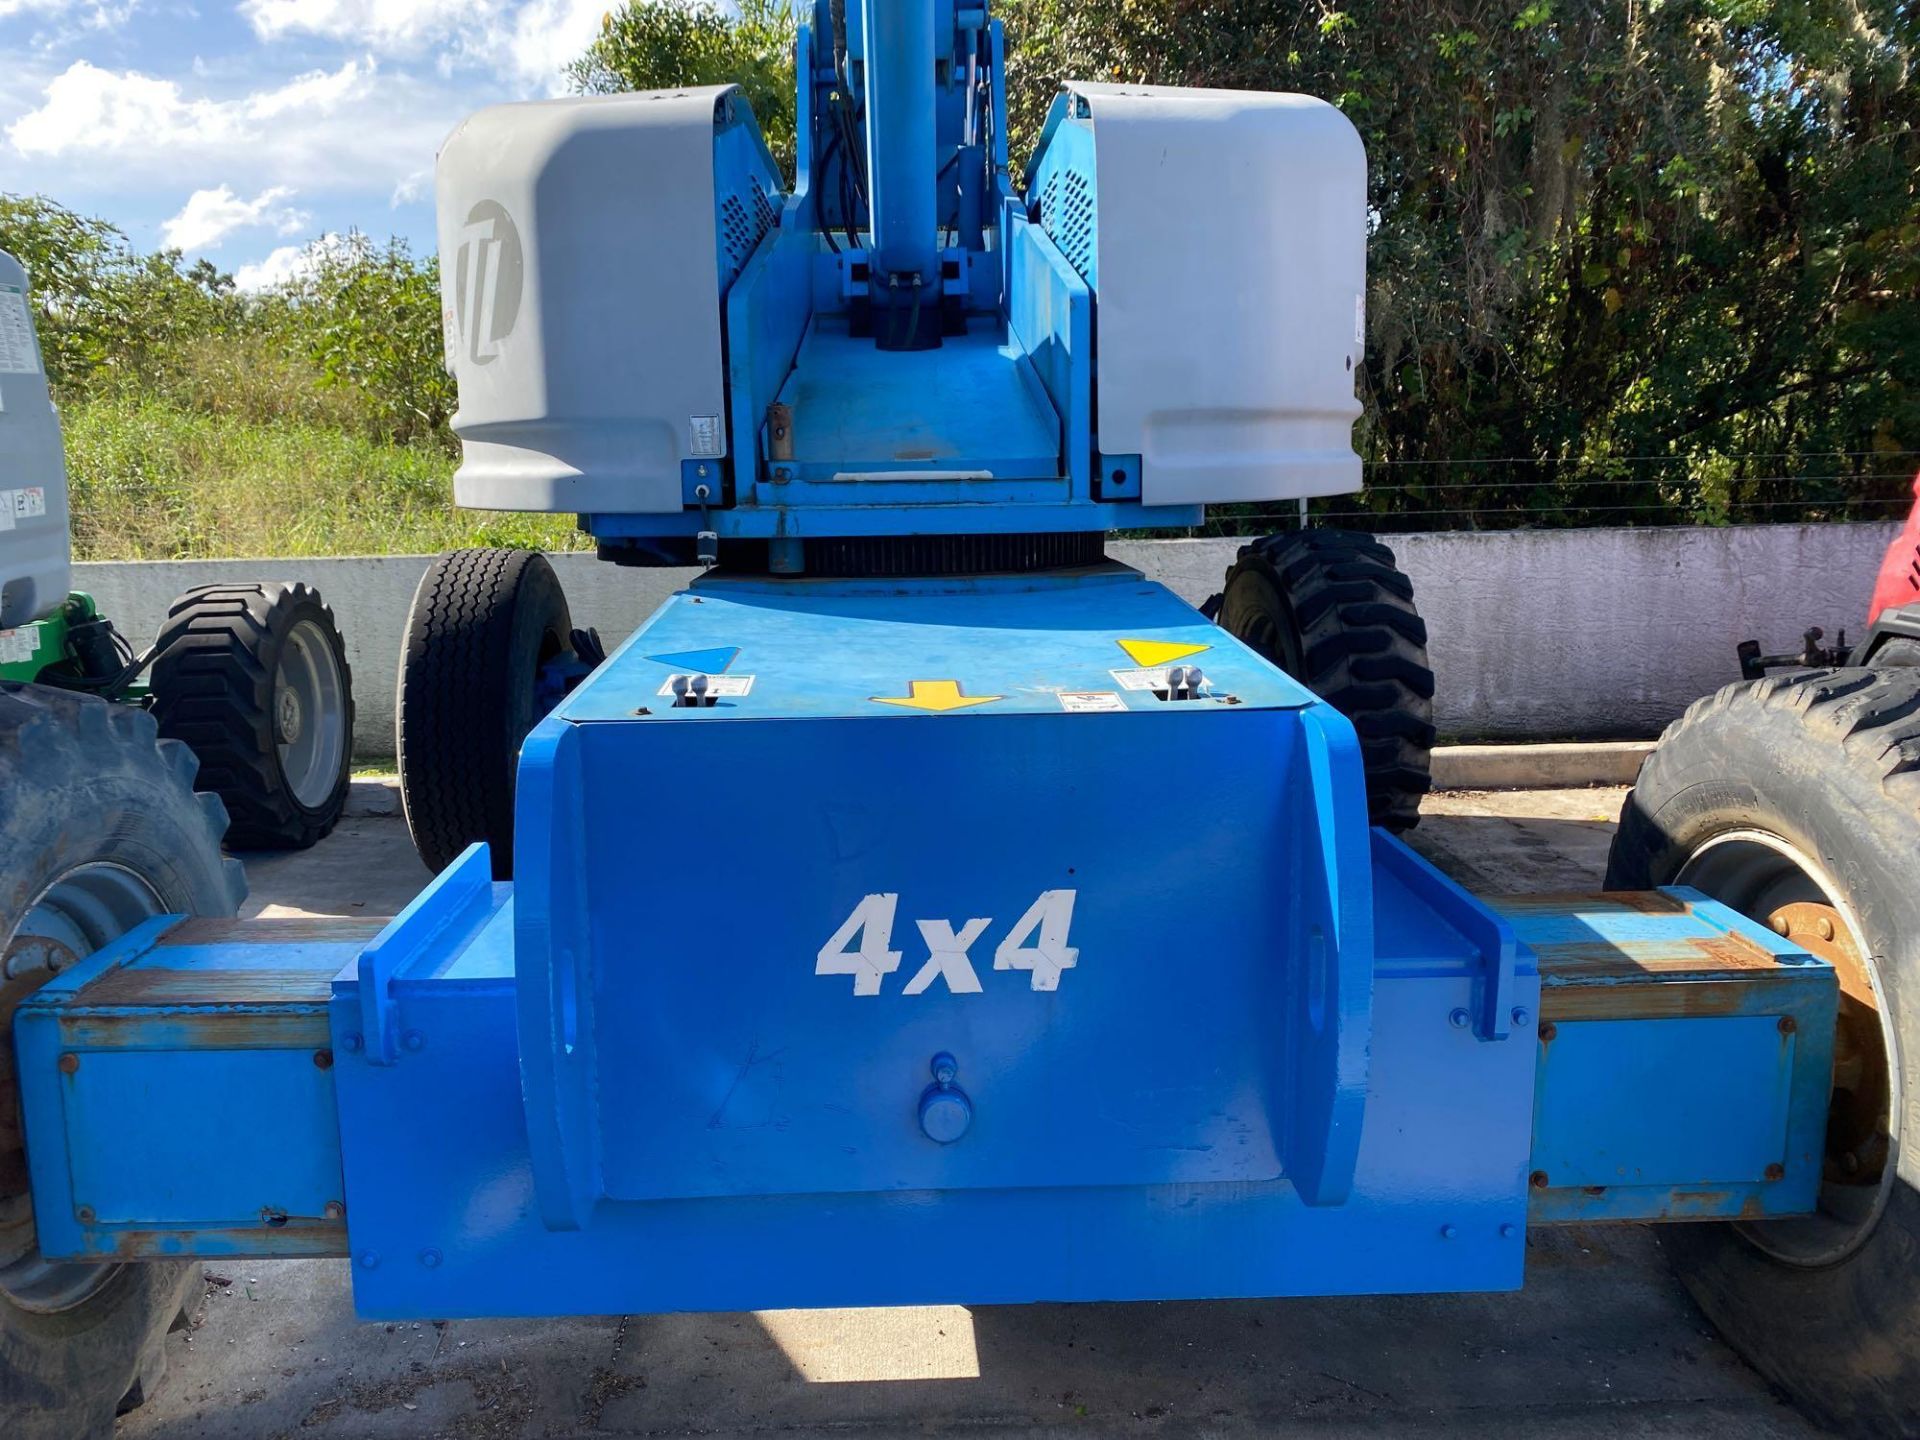 GENIE S-80 4x4 DIESEL BOOM LIFT, 80’ MAX PLATFORM HEIGHT, EXTENDING STABILITY AXLES, RUNS AND OPERAT - Image 7 of 15